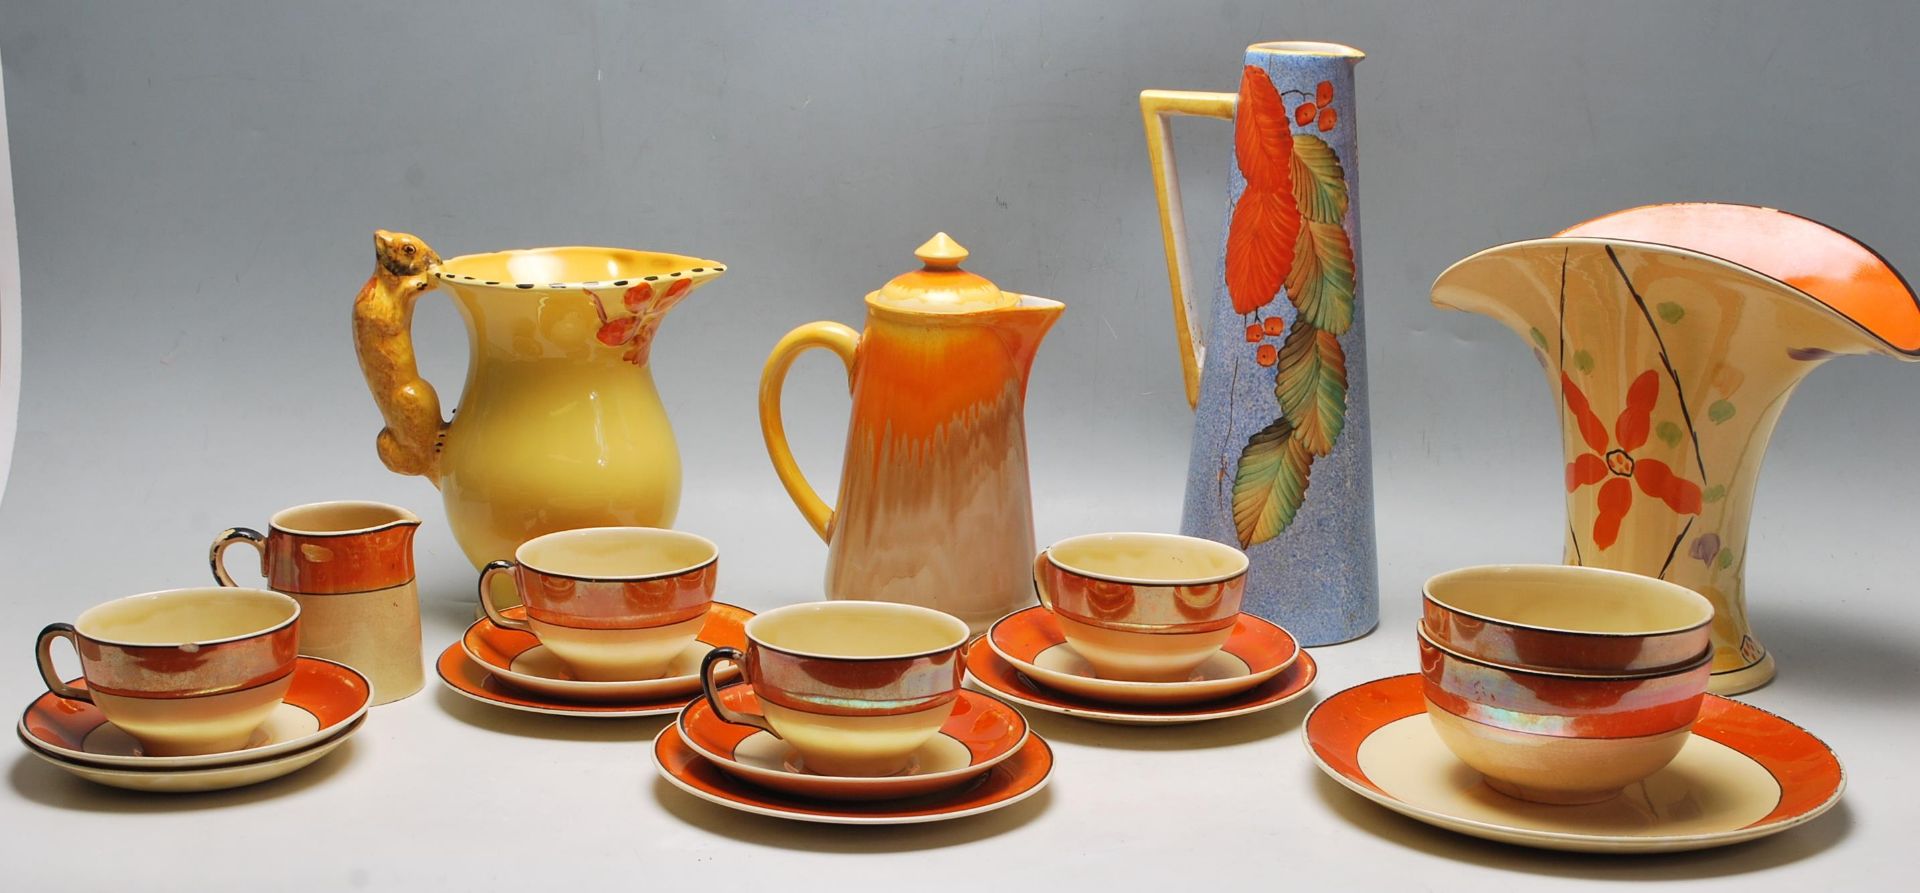 A QUANTITY OF VINTAGE 20TH CENTURY CERAMIC WARE FINISHED IN ORANGE COLOUR